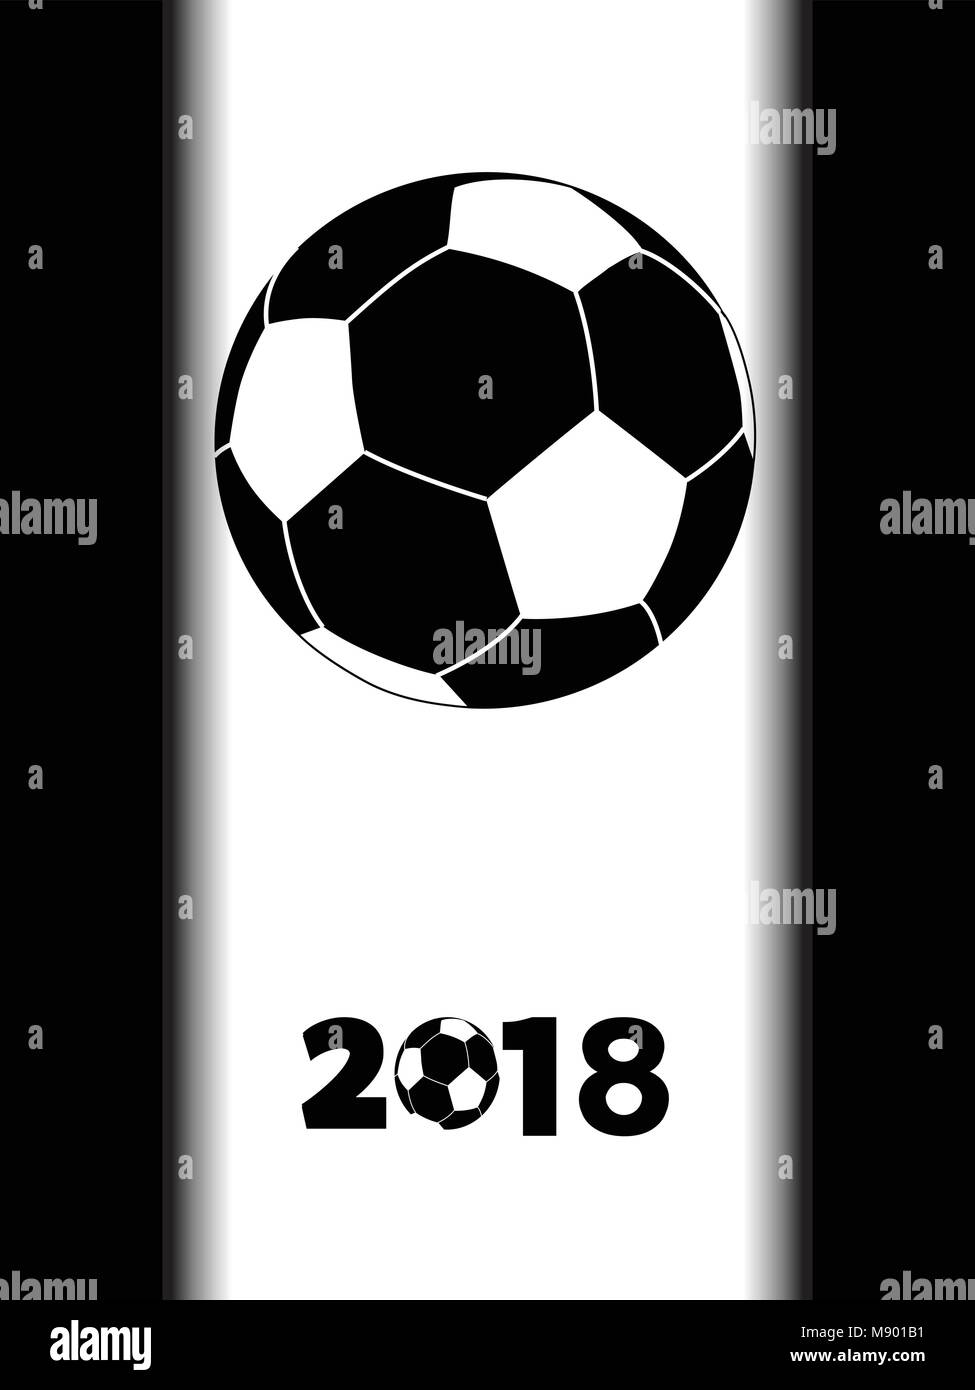 Soccer Football Black Silhouette with Decorative 2018 Over White Panel on Black Background Stock Vector